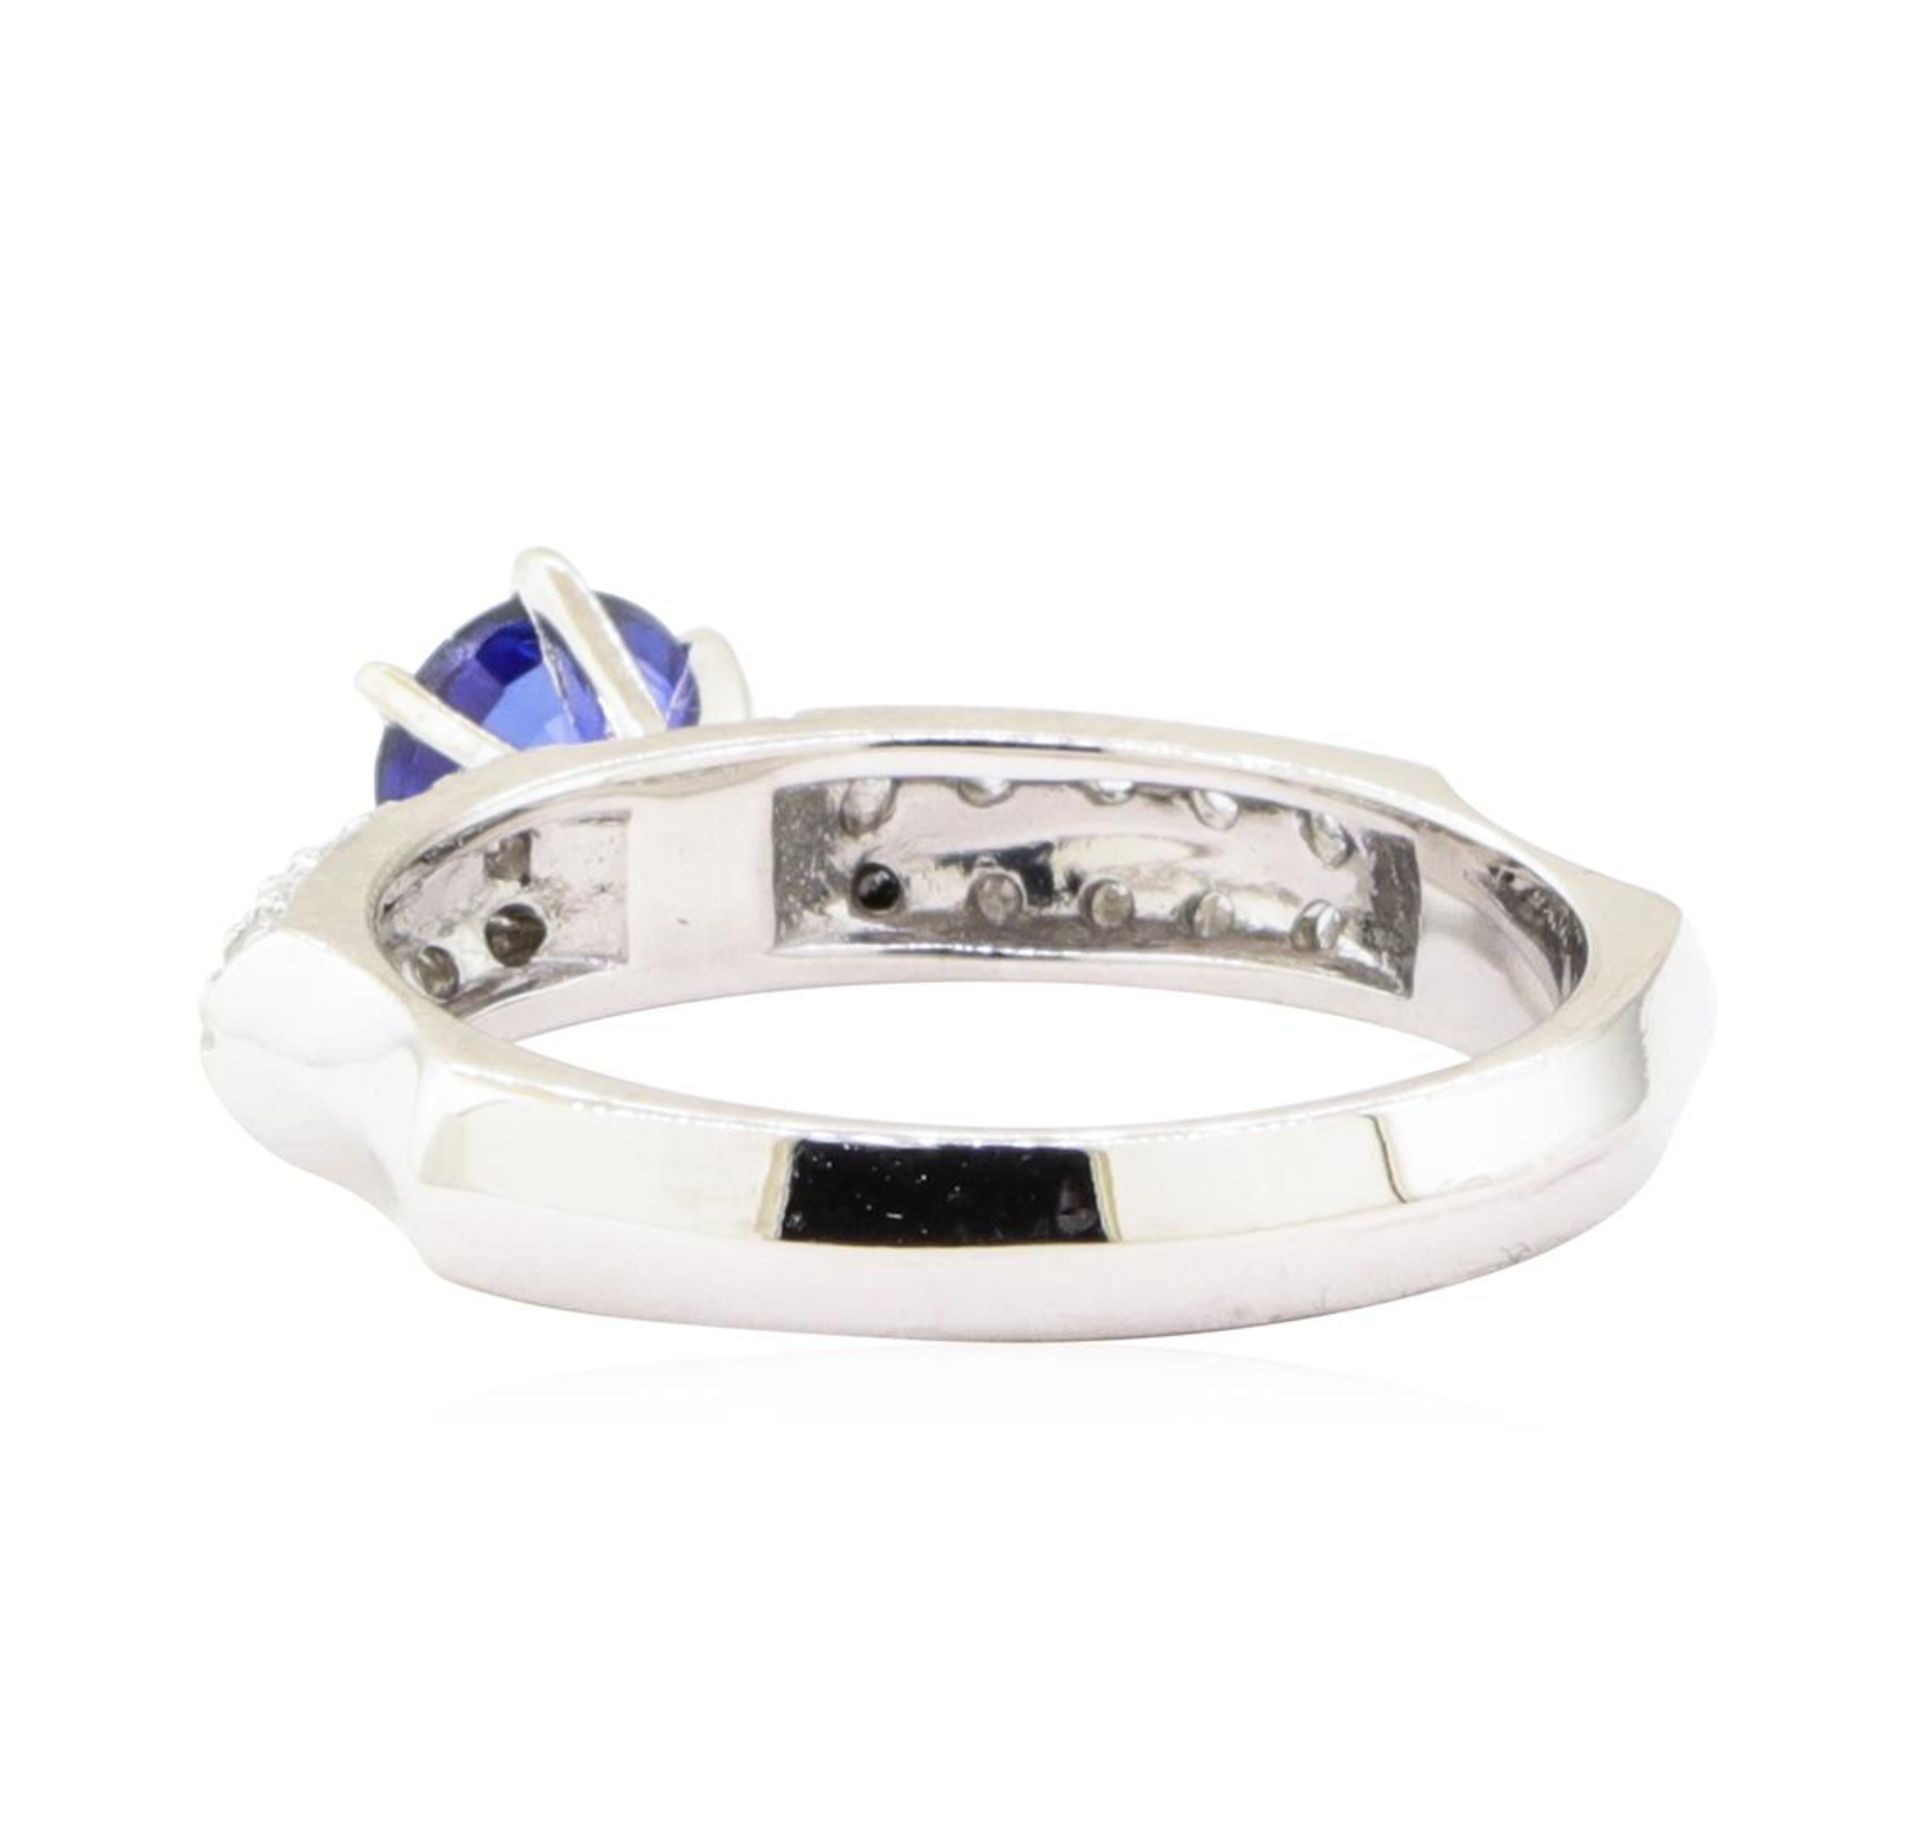 0.95 ctw Sapphire And Diamond Ring - 18KT White Gold - Image 3 of 5